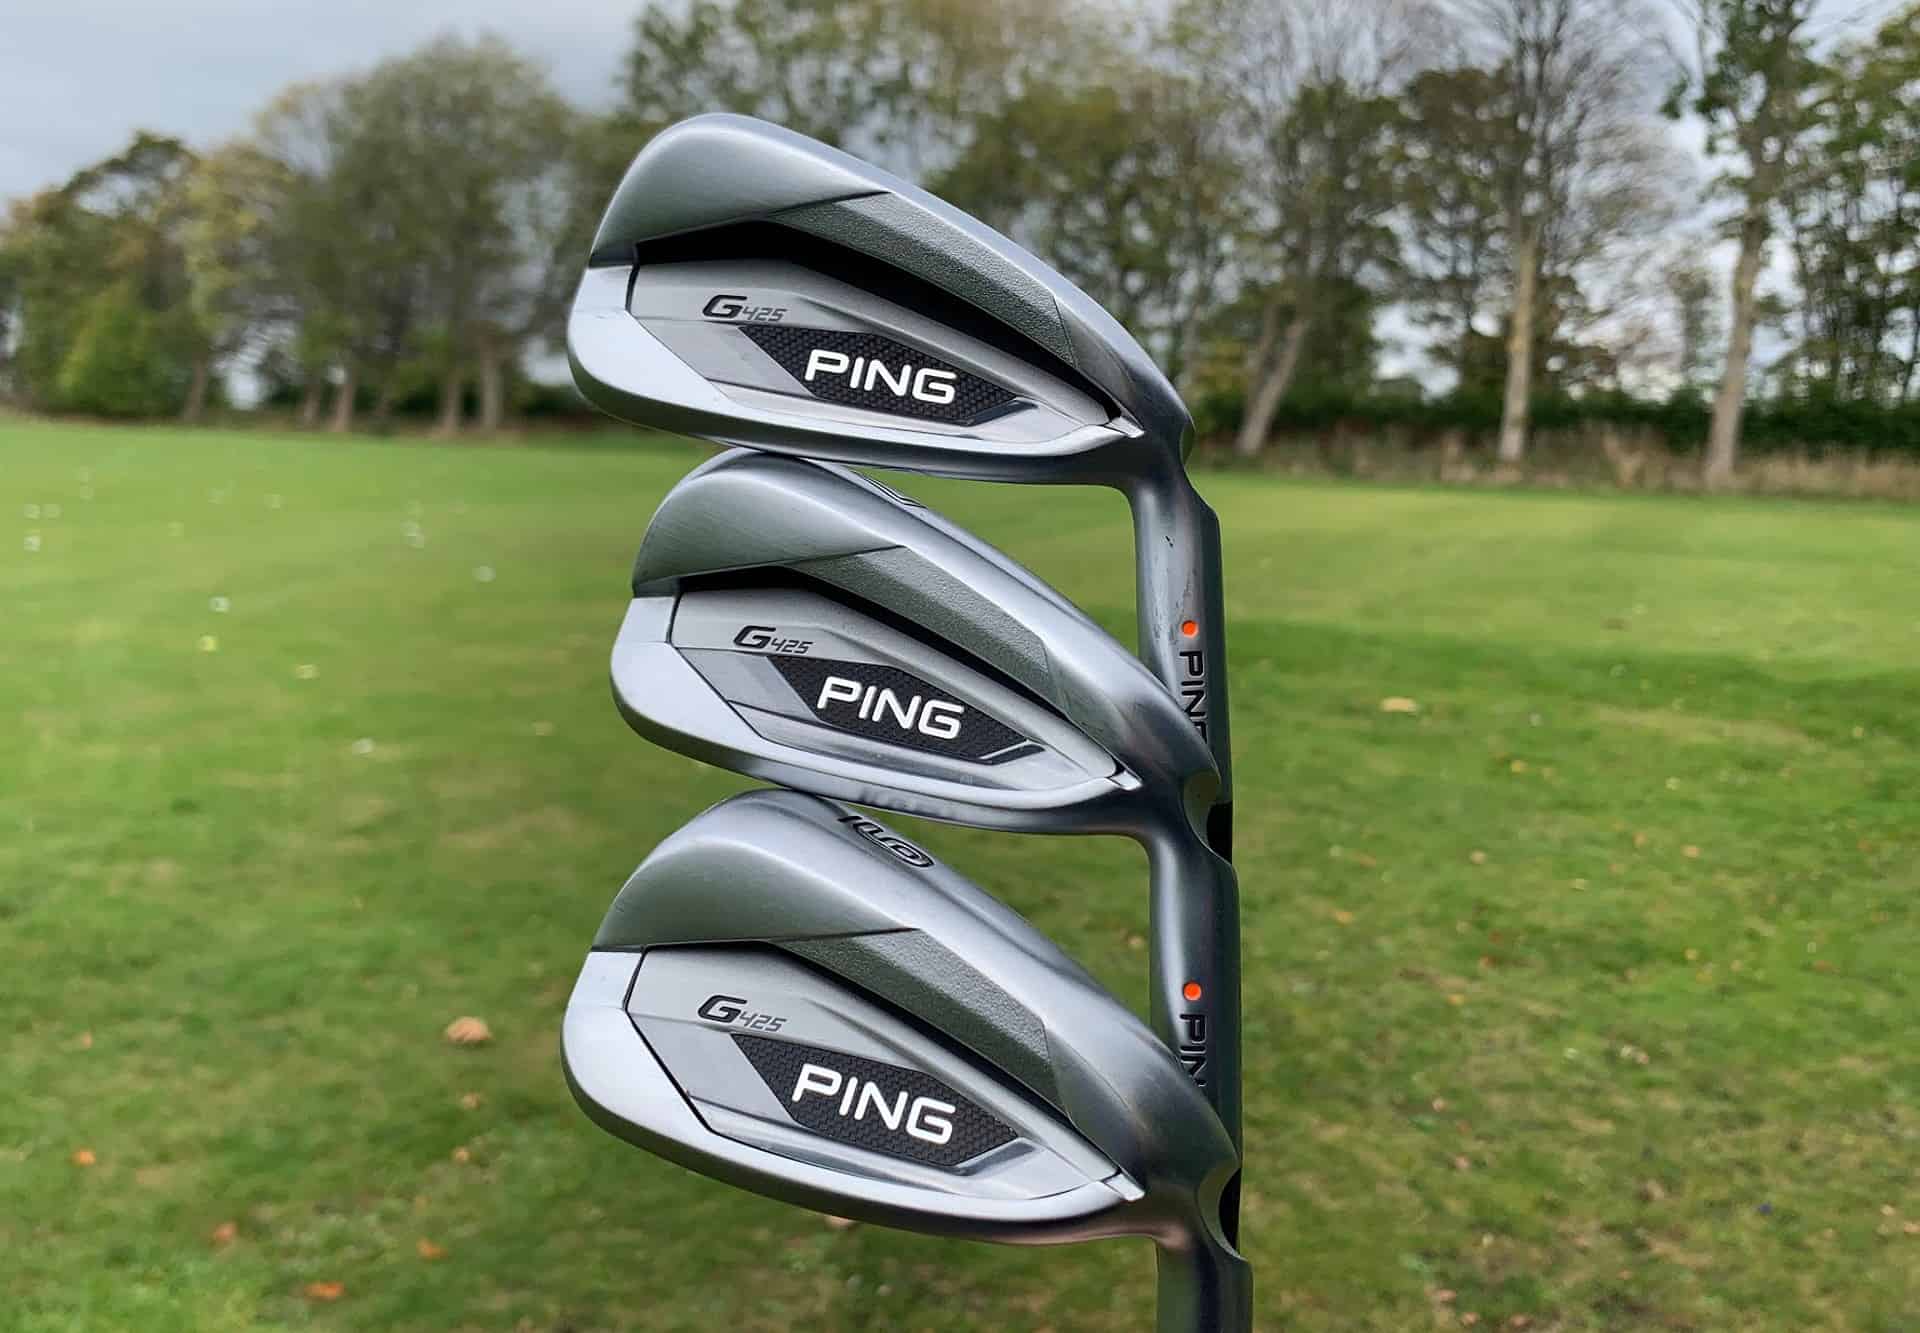 Ping G425 irons review